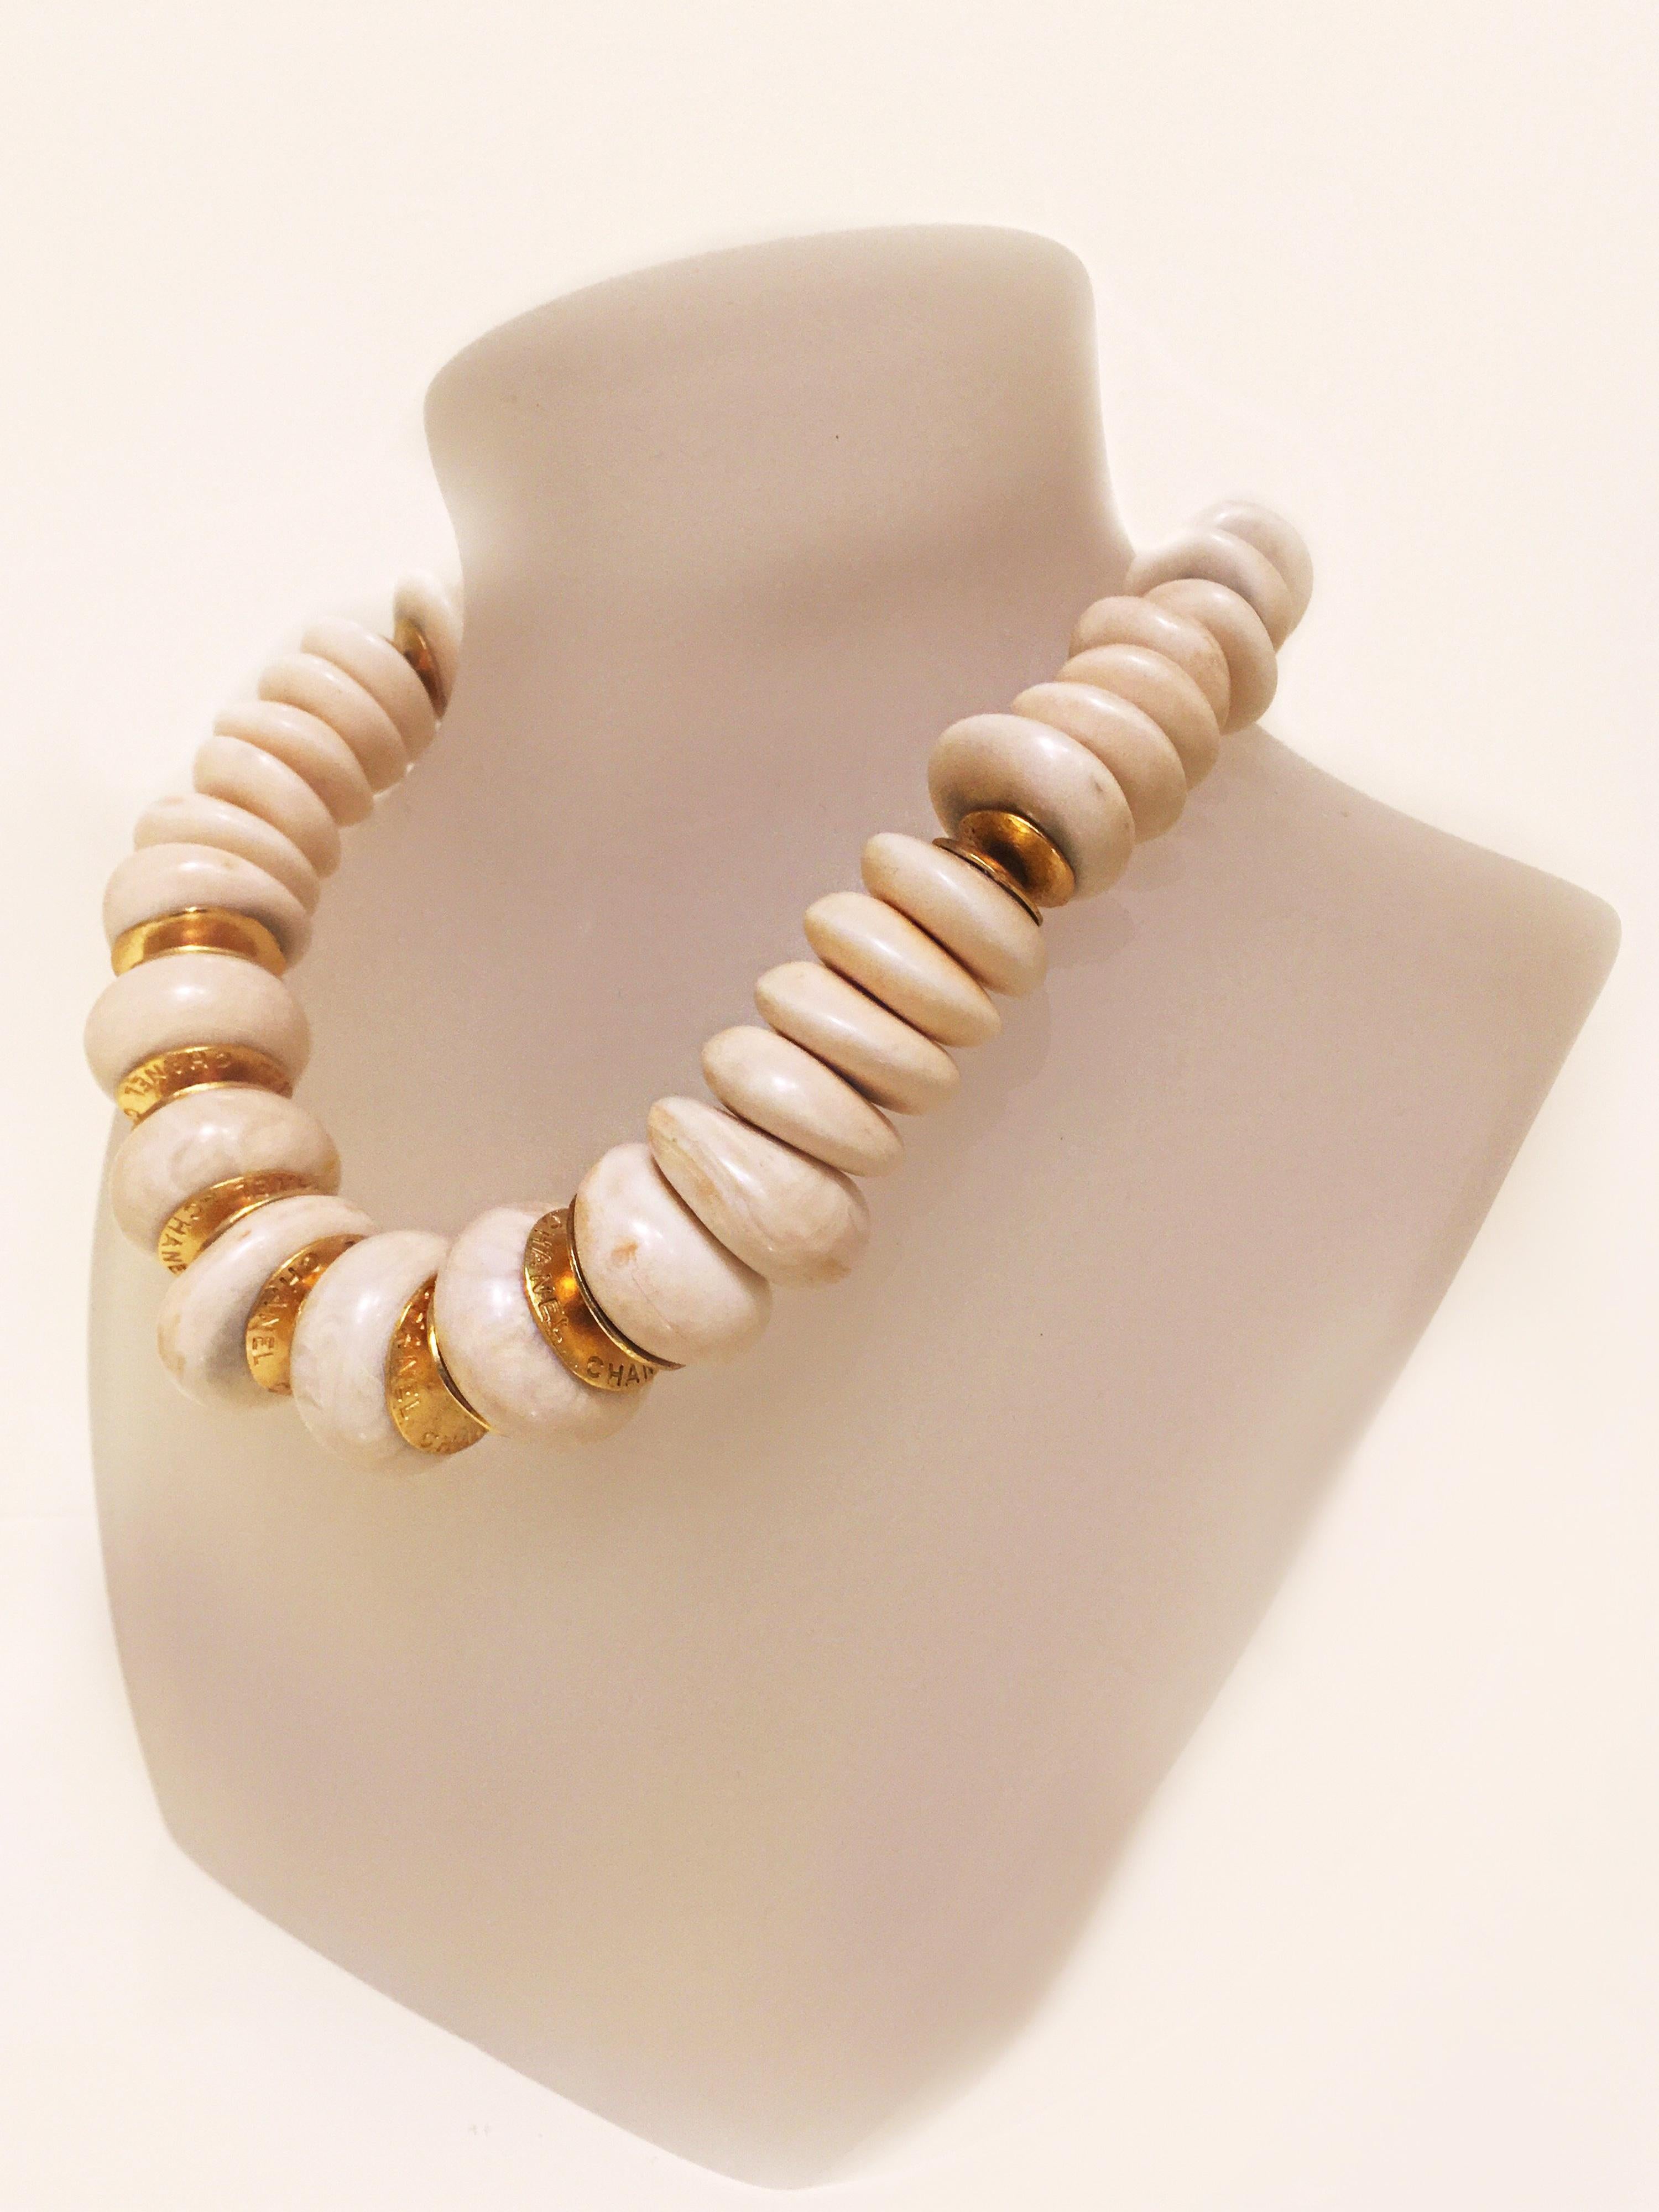 From the 90's era this rare Chanel necklace is a knockout. The large, ivory marbleized beads of resin, are intertwined with gold disc accents;  each one is engraved Chanel. Interlocking CC engraved gold beads at the back with adjustable hook and